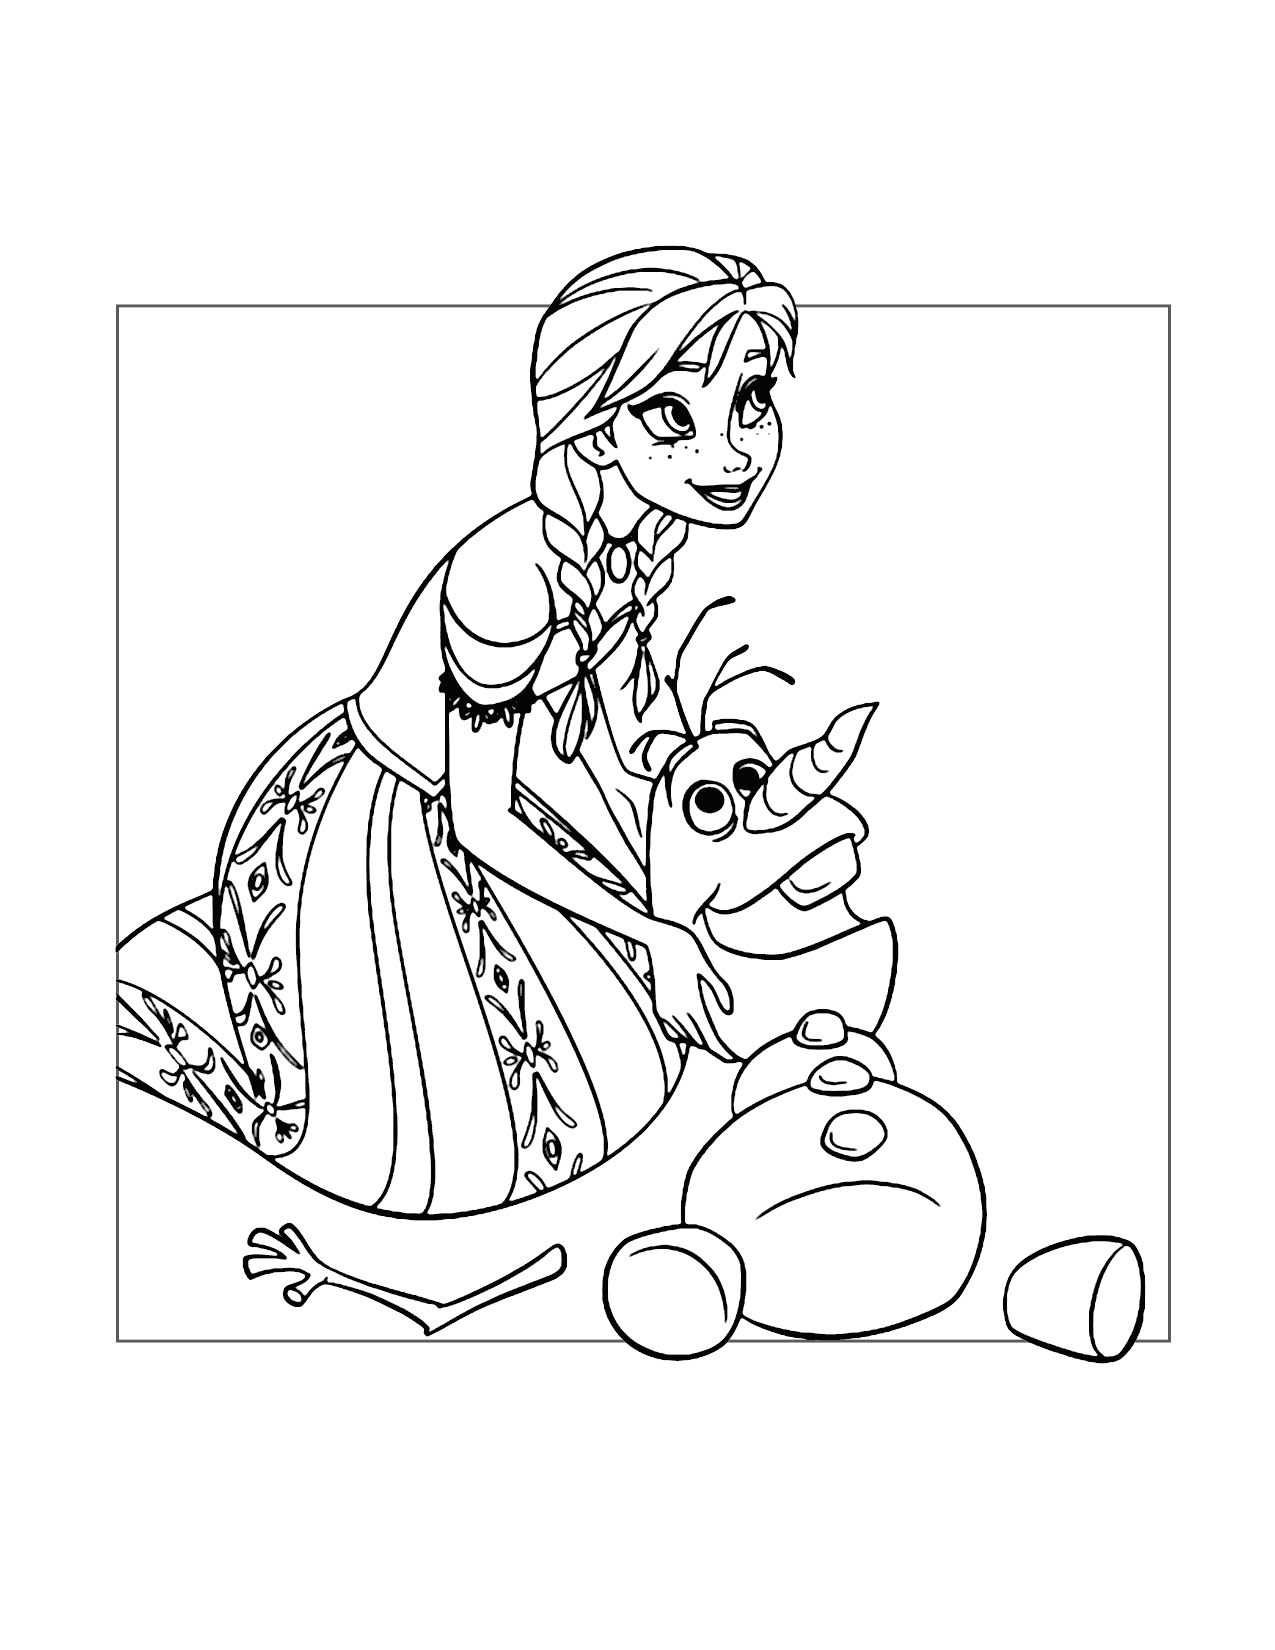 Anna Helps Olaf Coloring Page